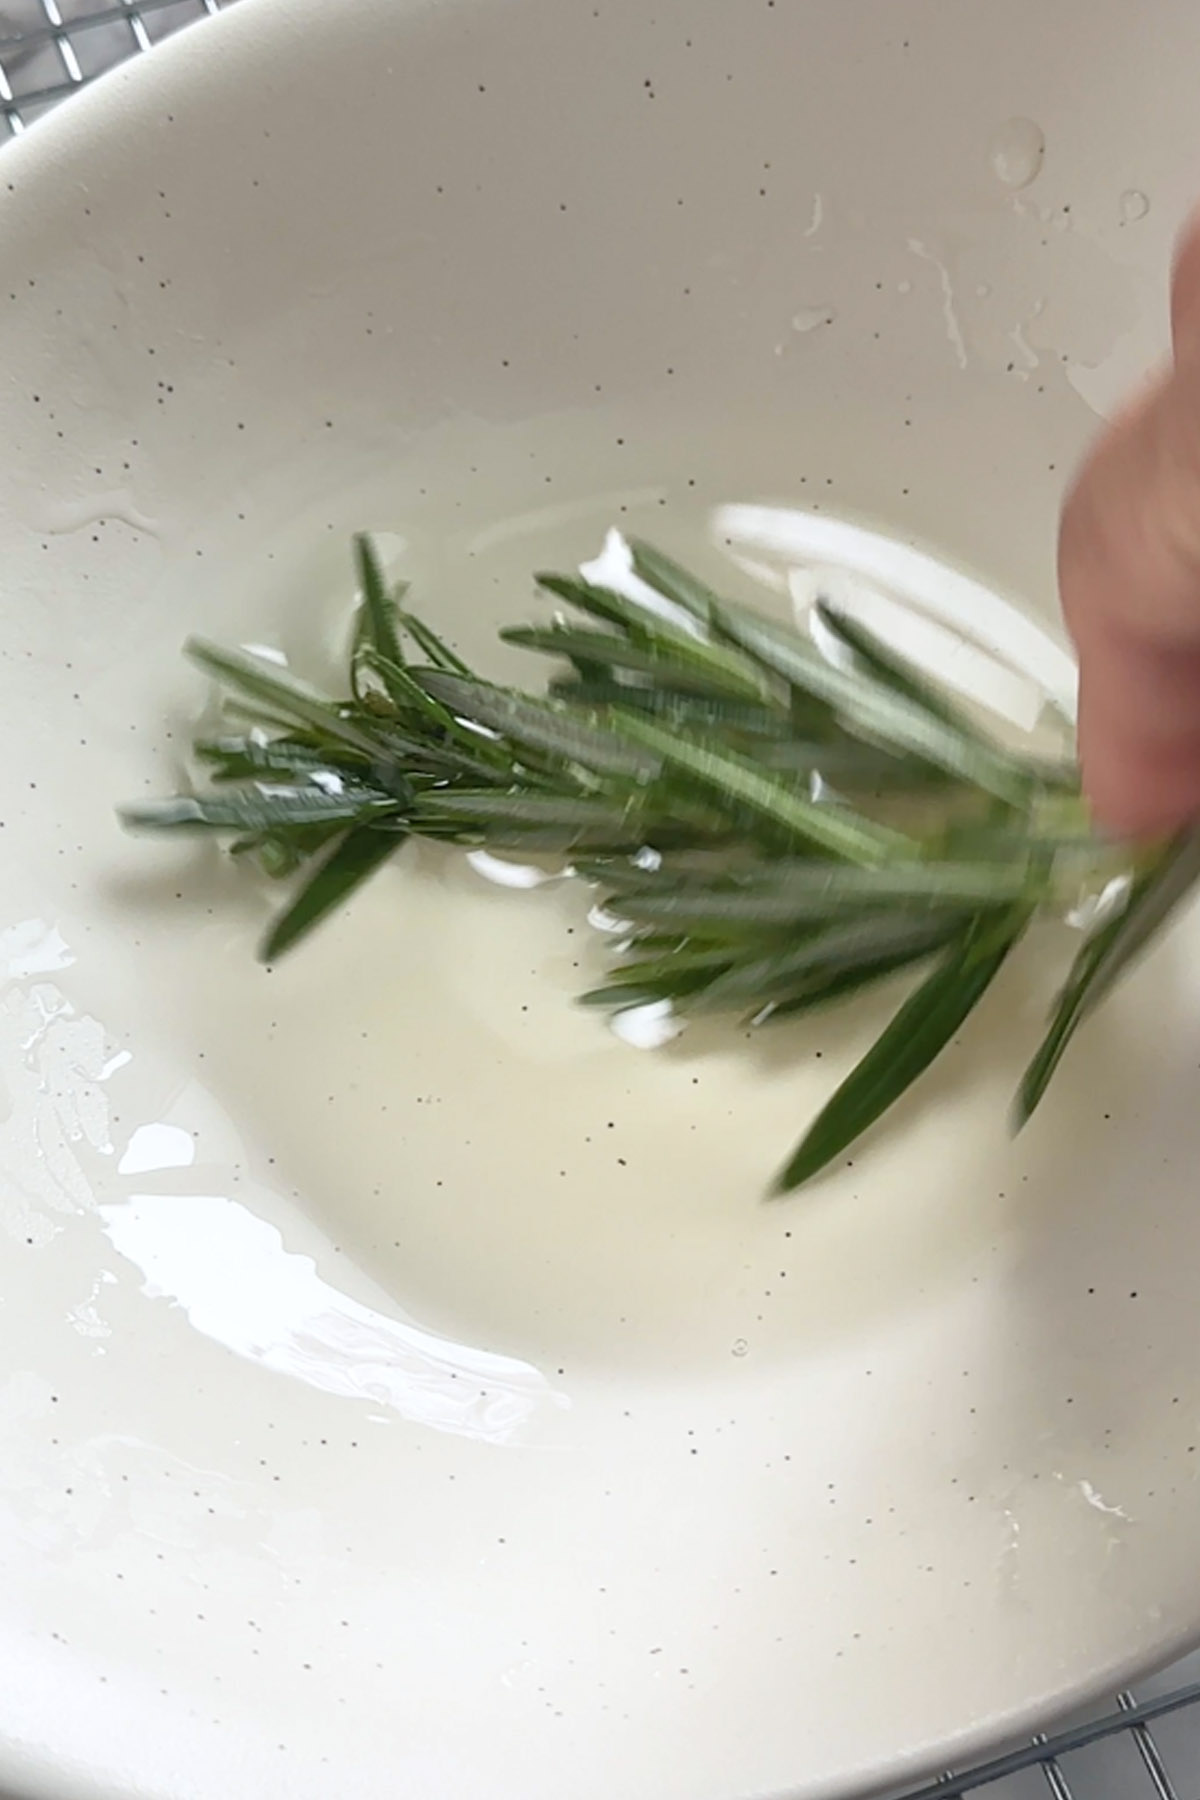 Rosemary is dipped into simple syrup.